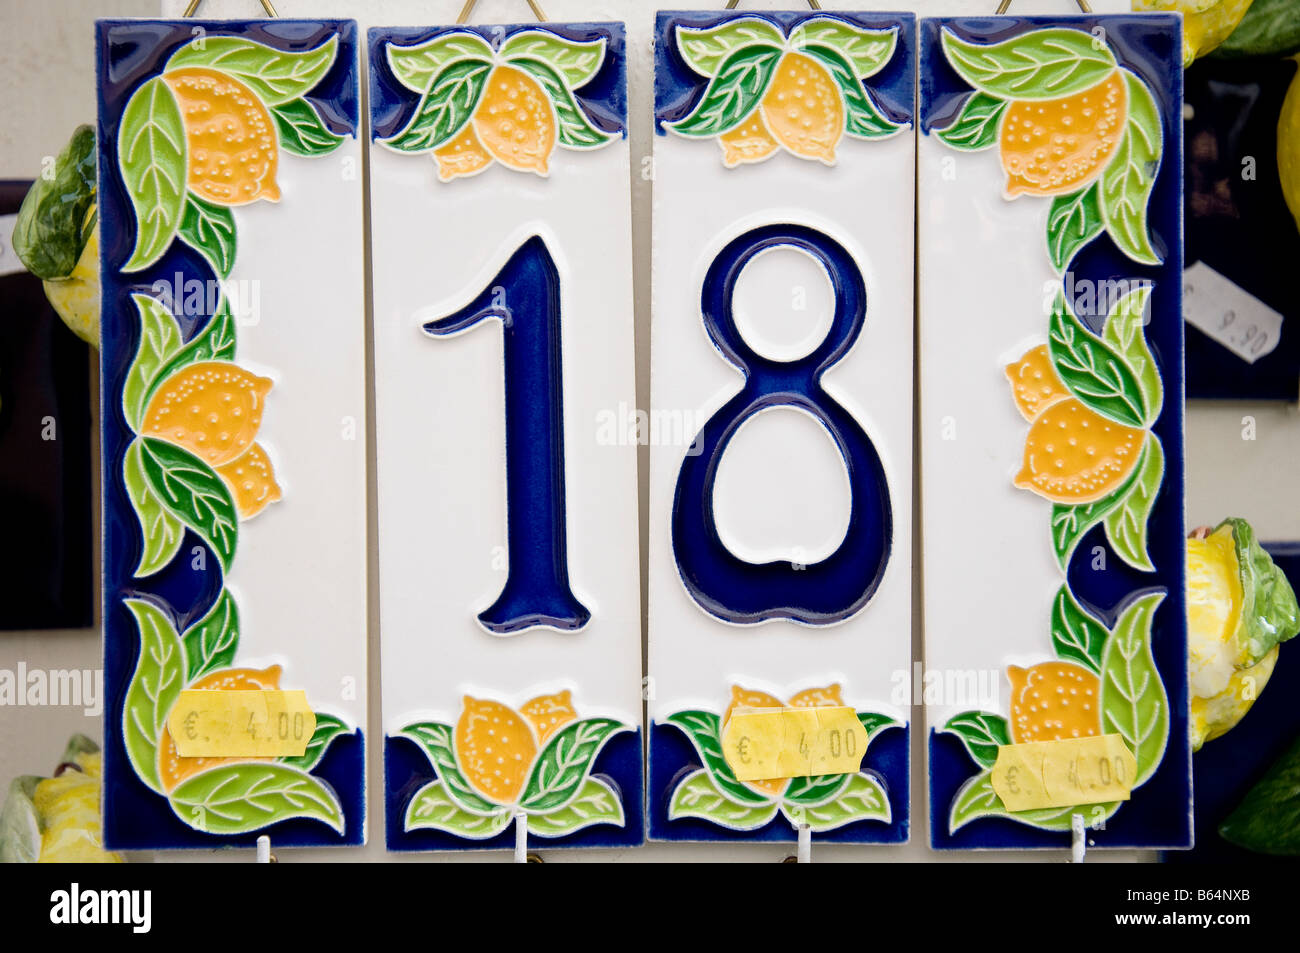 House number 18 and lemons on a ceramic tile for sale with price labels Limone sul Garda Lake Garda Italy Stock Photo